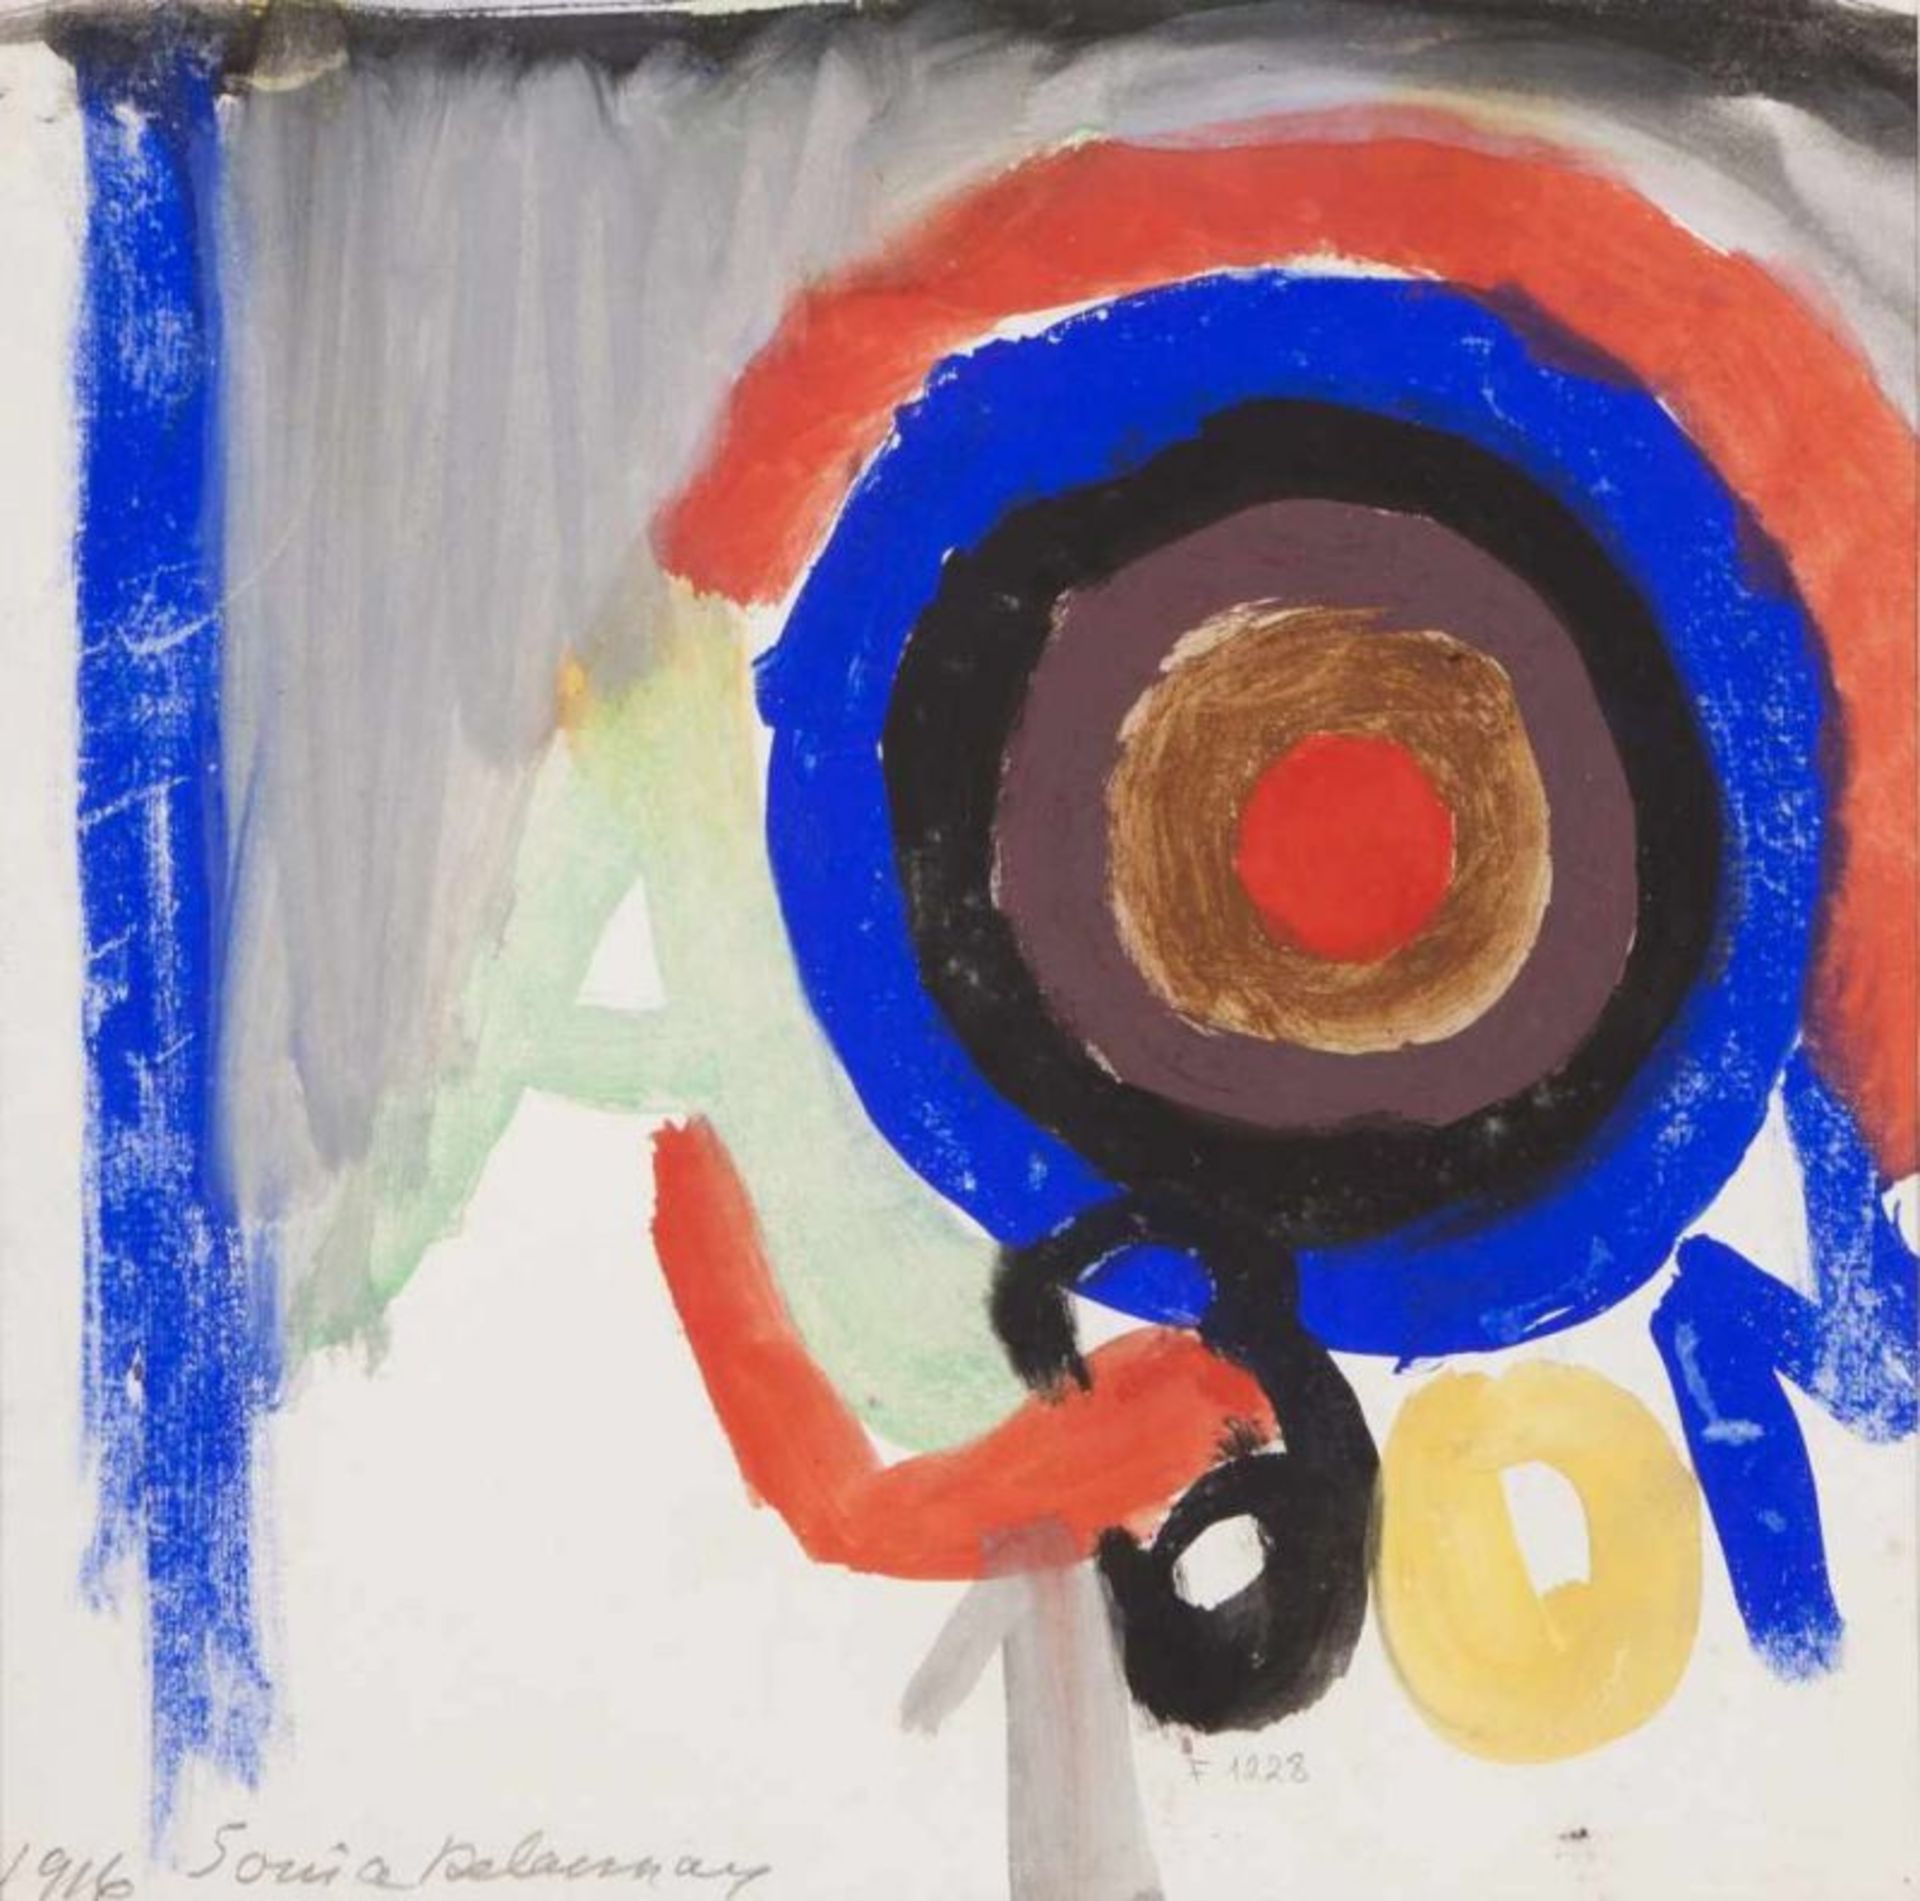 Sonia Delaunay (1885-1979) "Projet Album nº1, F. 1228" Gouache on paper With label on the back